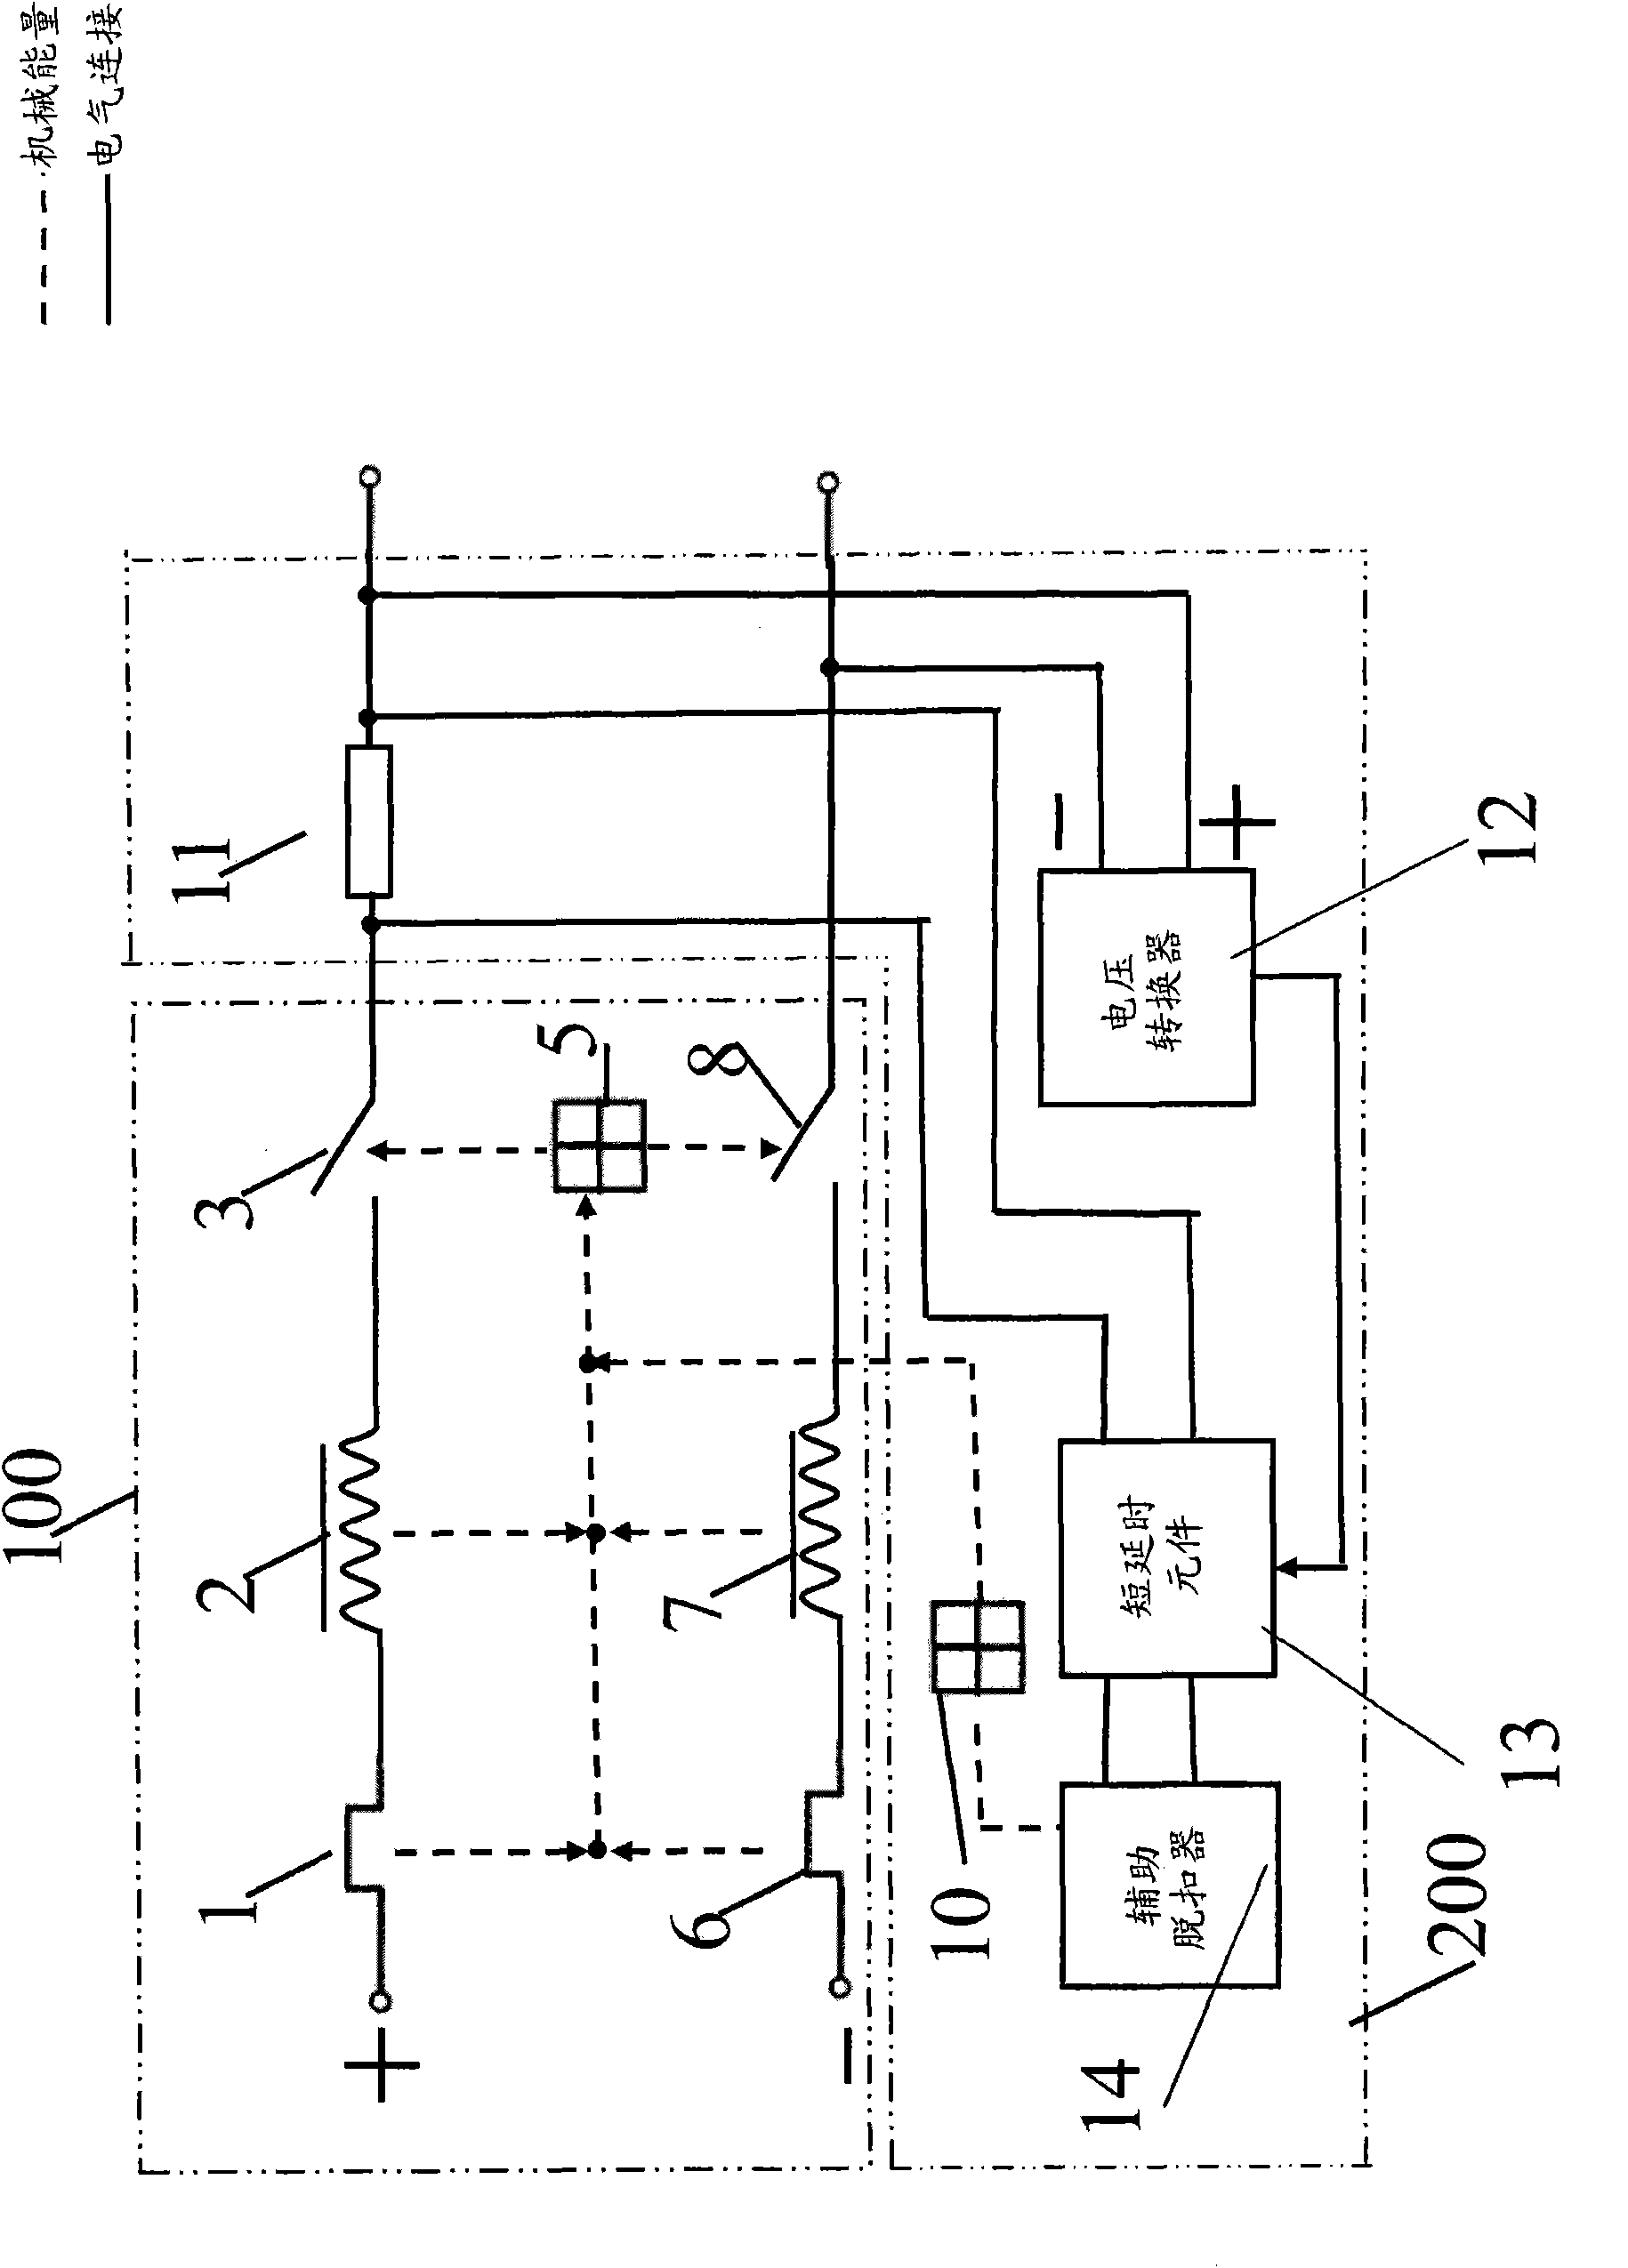 Direct-current circuit breaker with selectivity